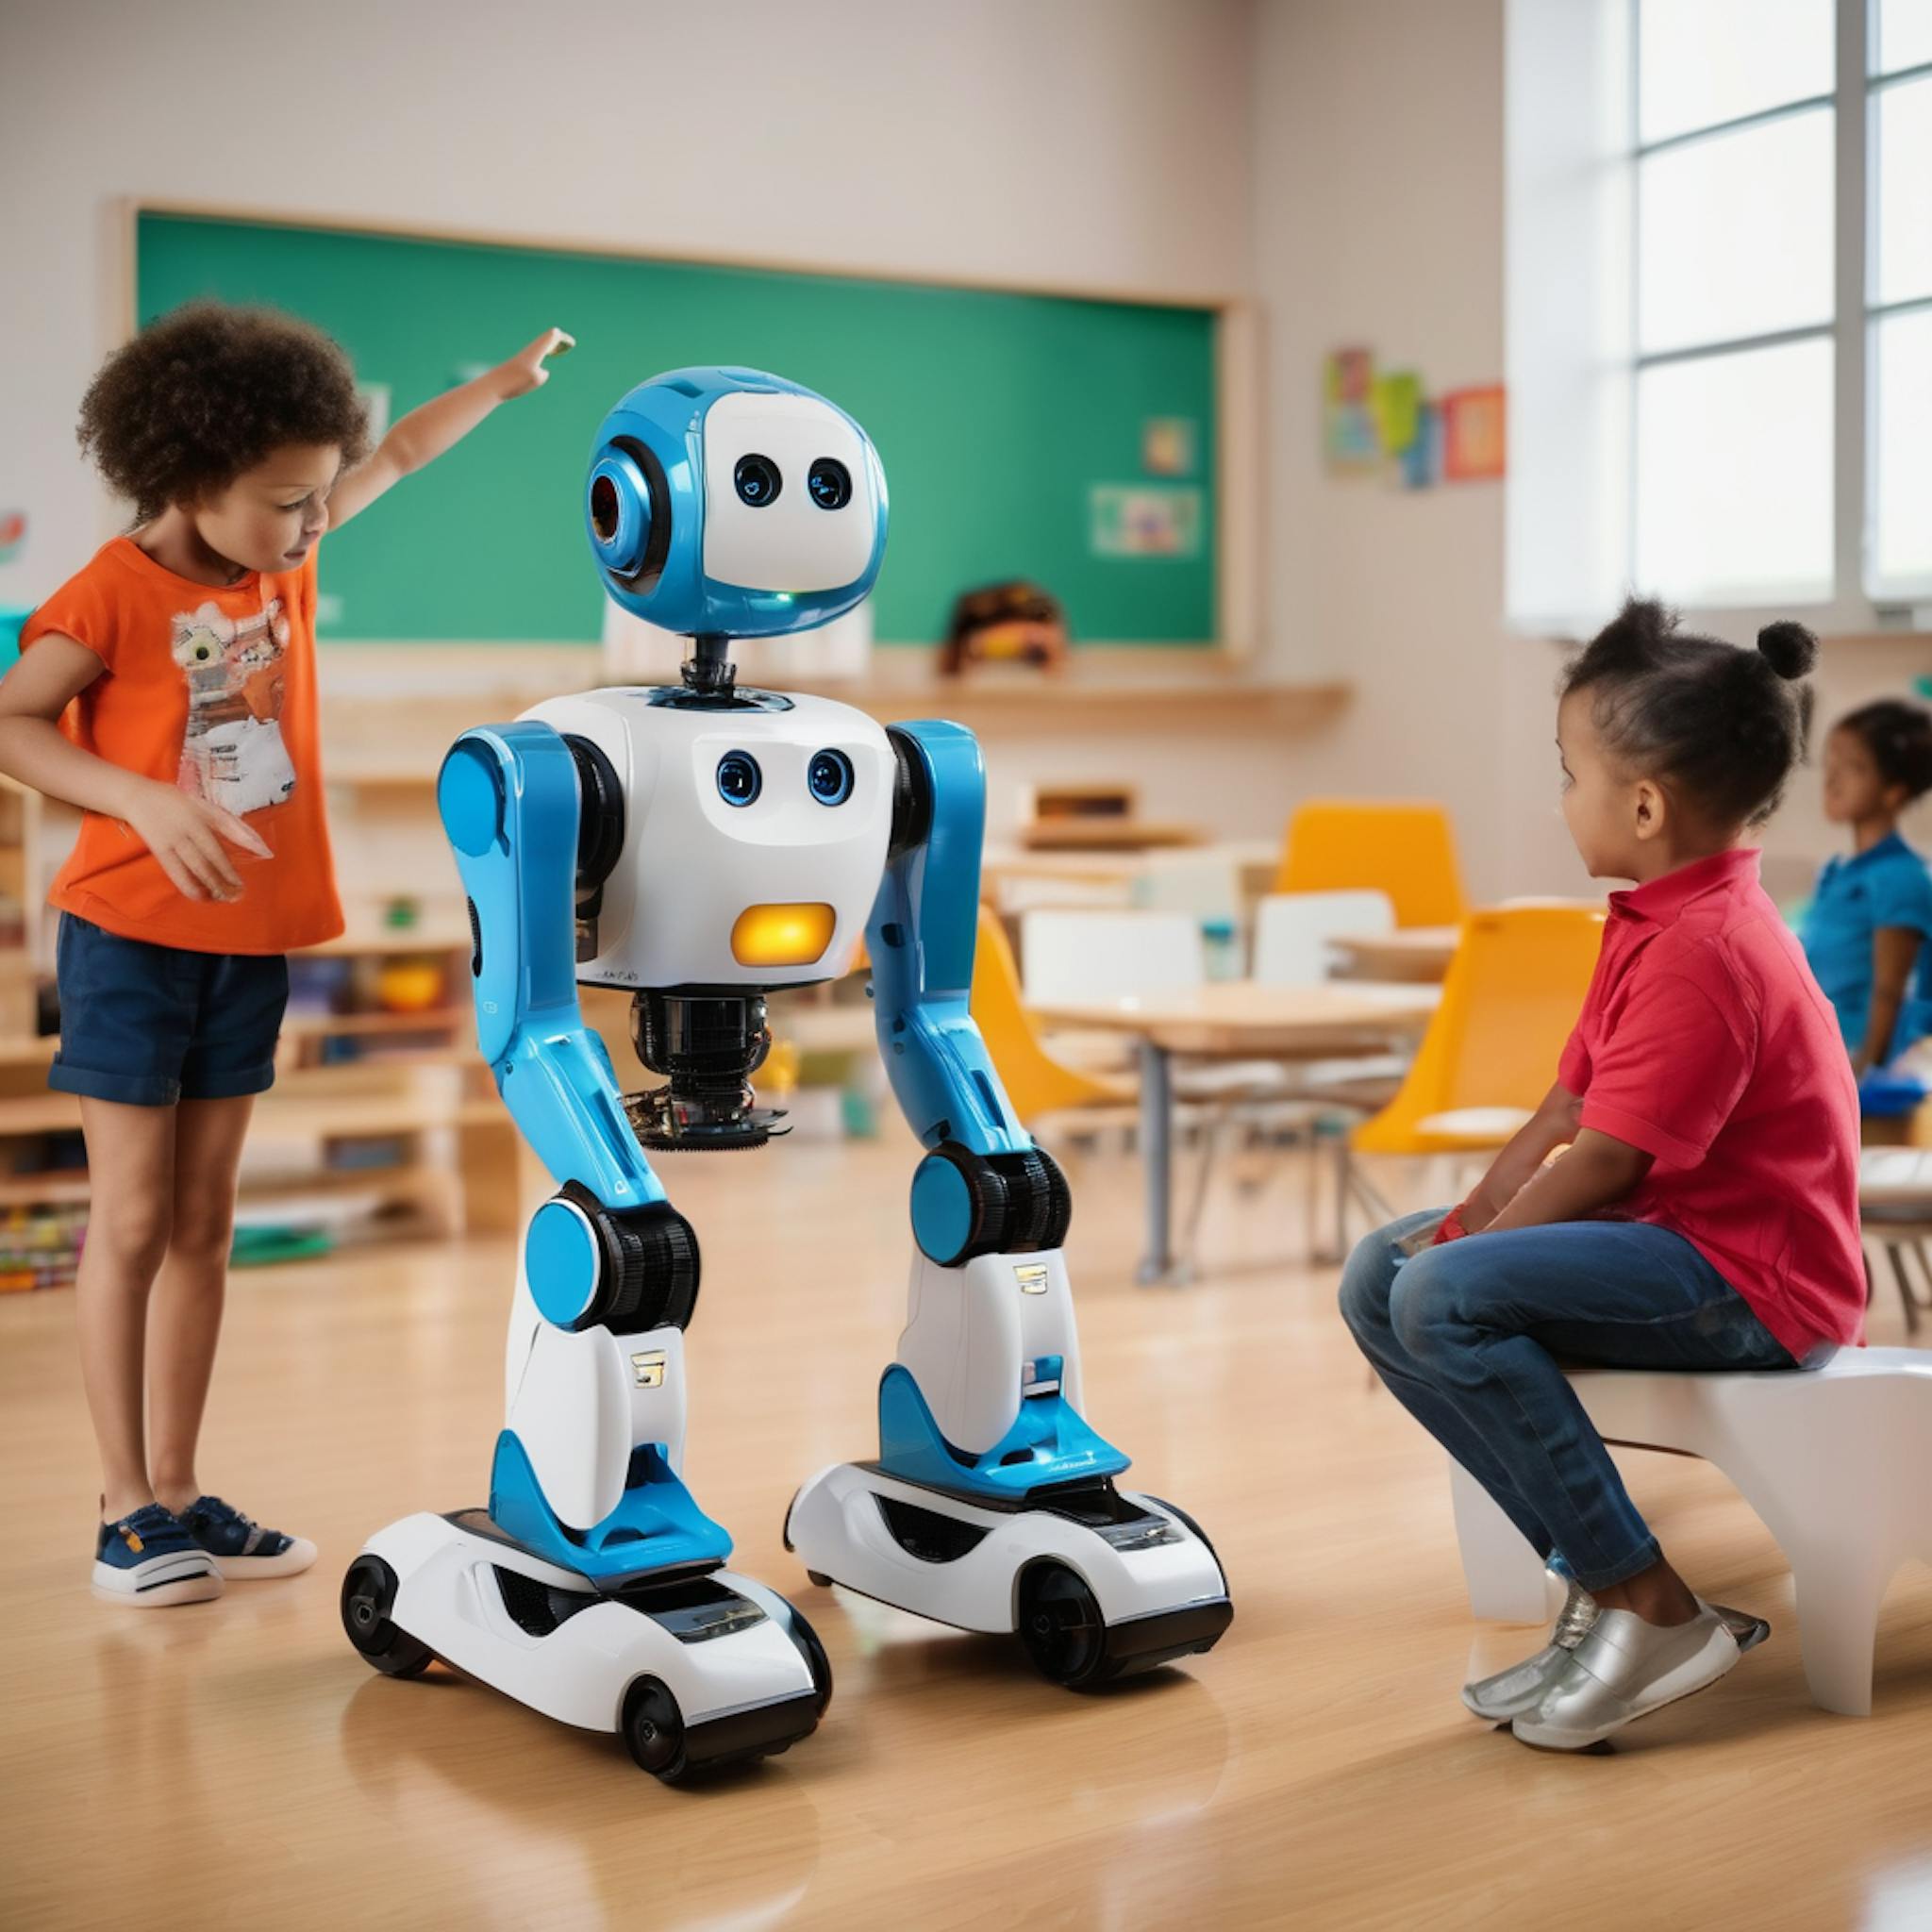 featured image - AI in the Classroom: ChatGPT's Role in Modernizing Teaching Practices